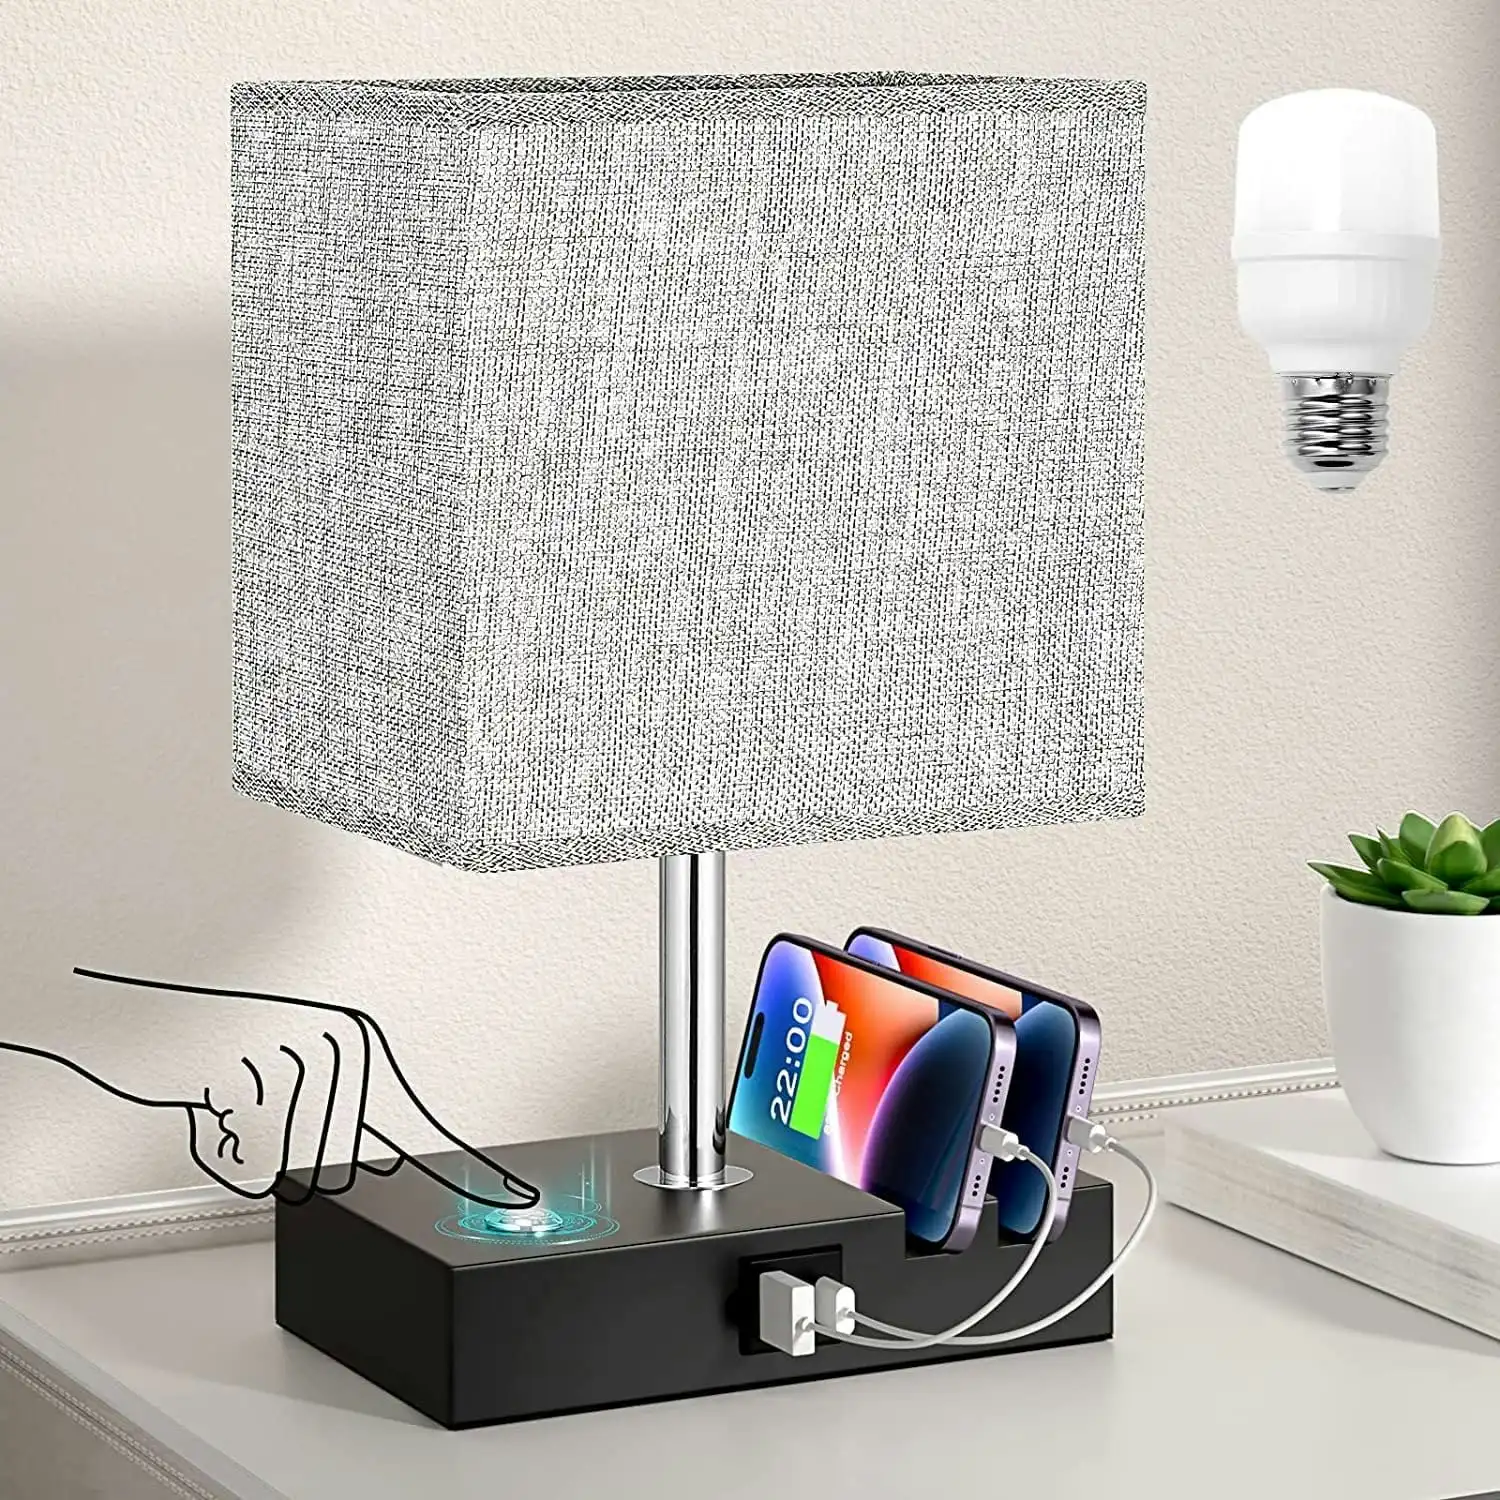 Dimmable Table Lamp for Bedroom, Touch Control, USB C+A, Phone Stand, Small Desk Lamp, LED Bulb Included